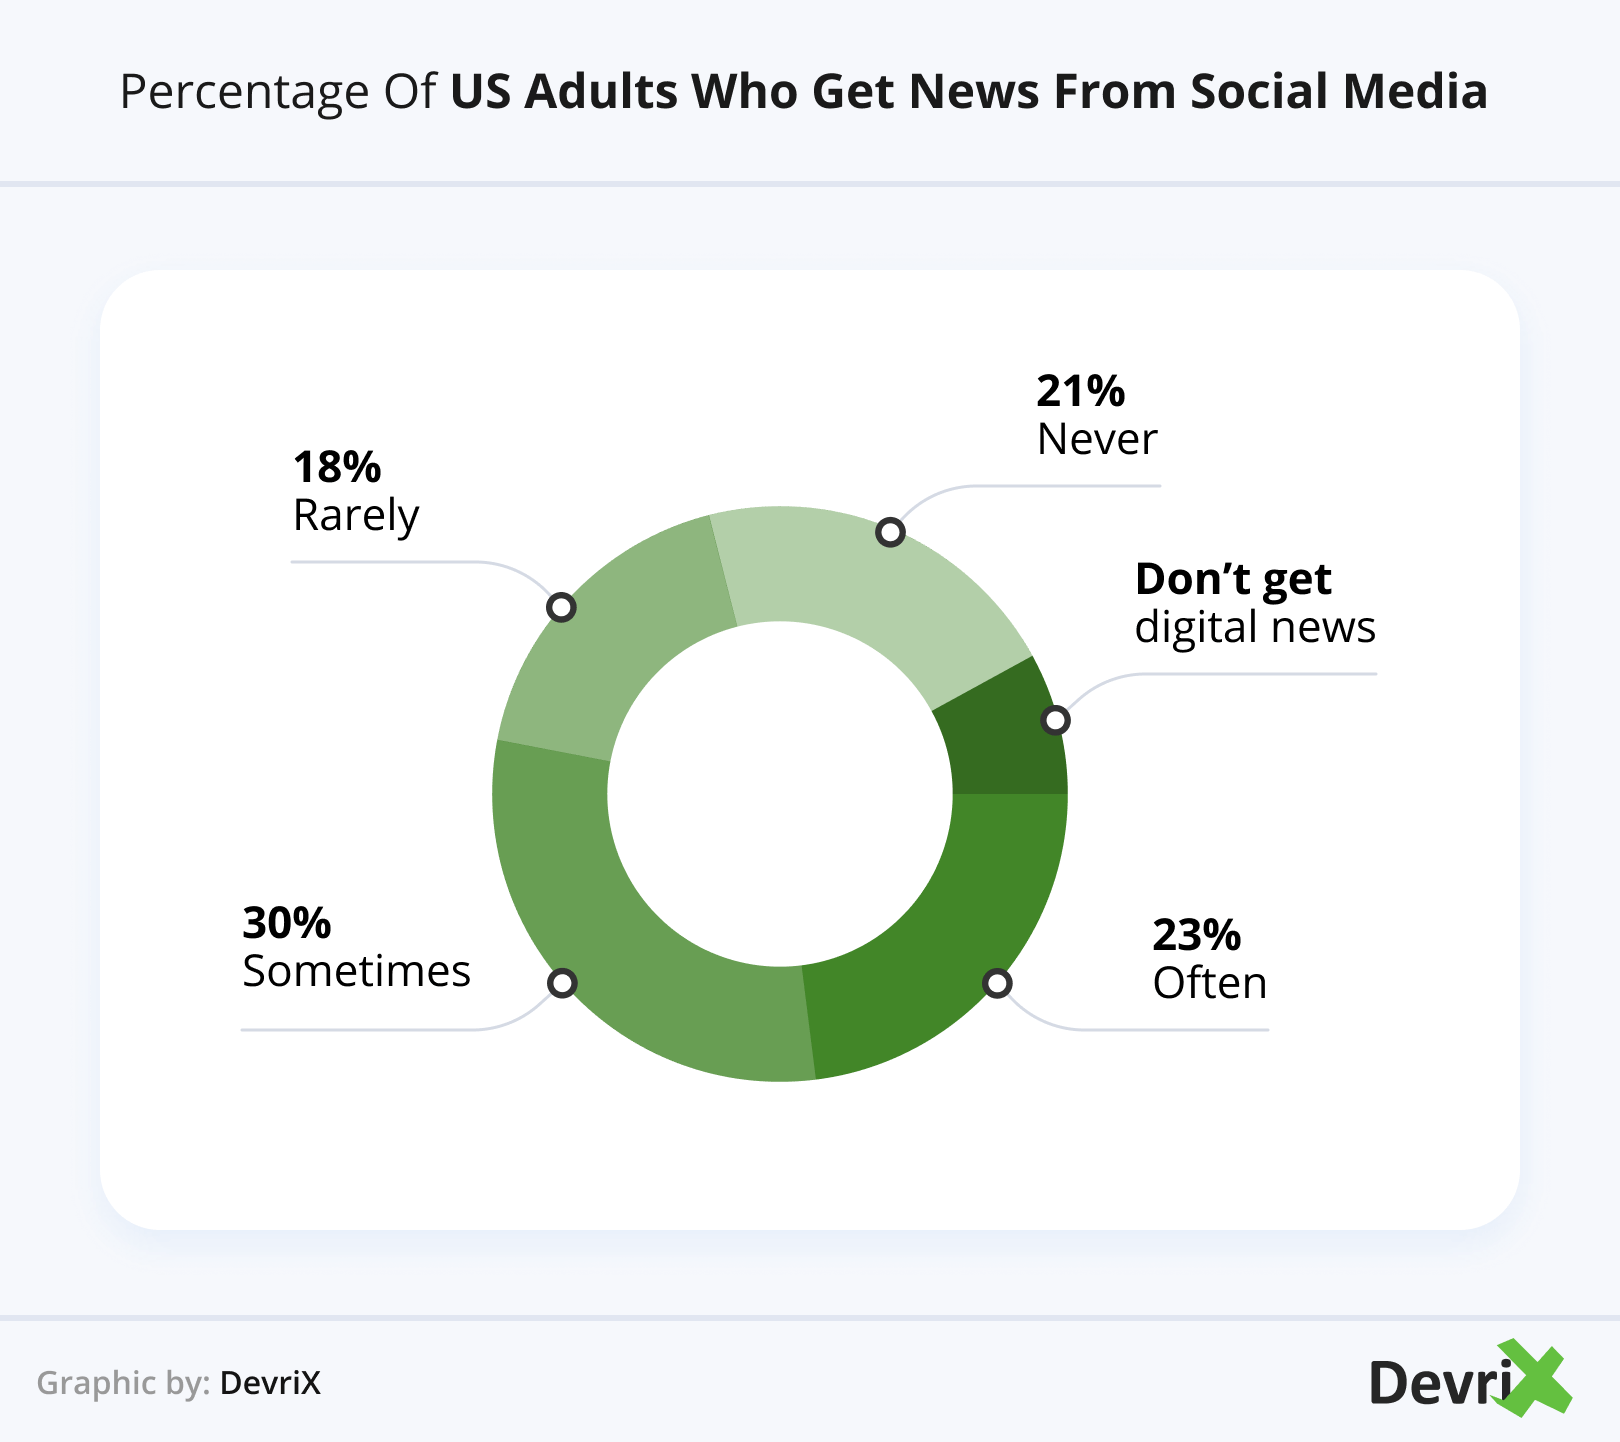 Percentage of US adults who get news from Social Media